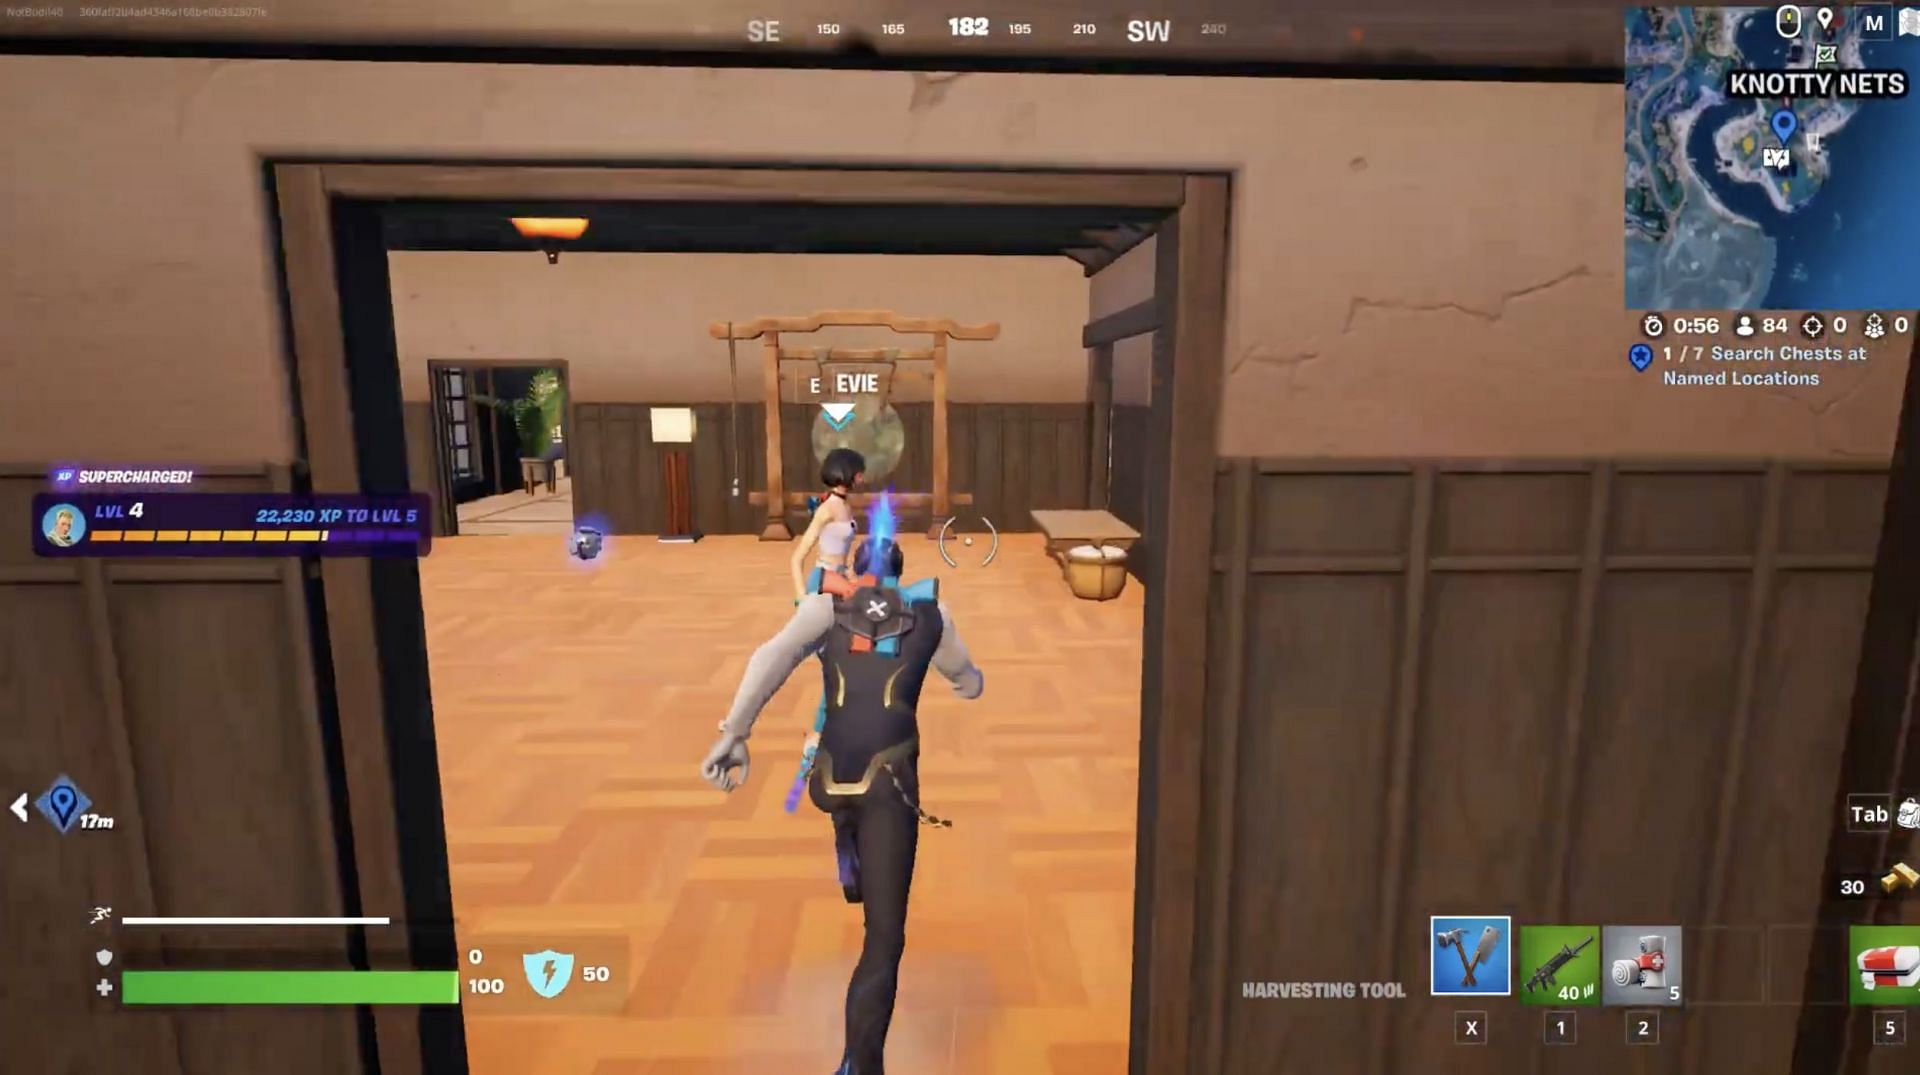 Evie is in this building at Knotty Nets (Image via Bodil40 on YouTube)